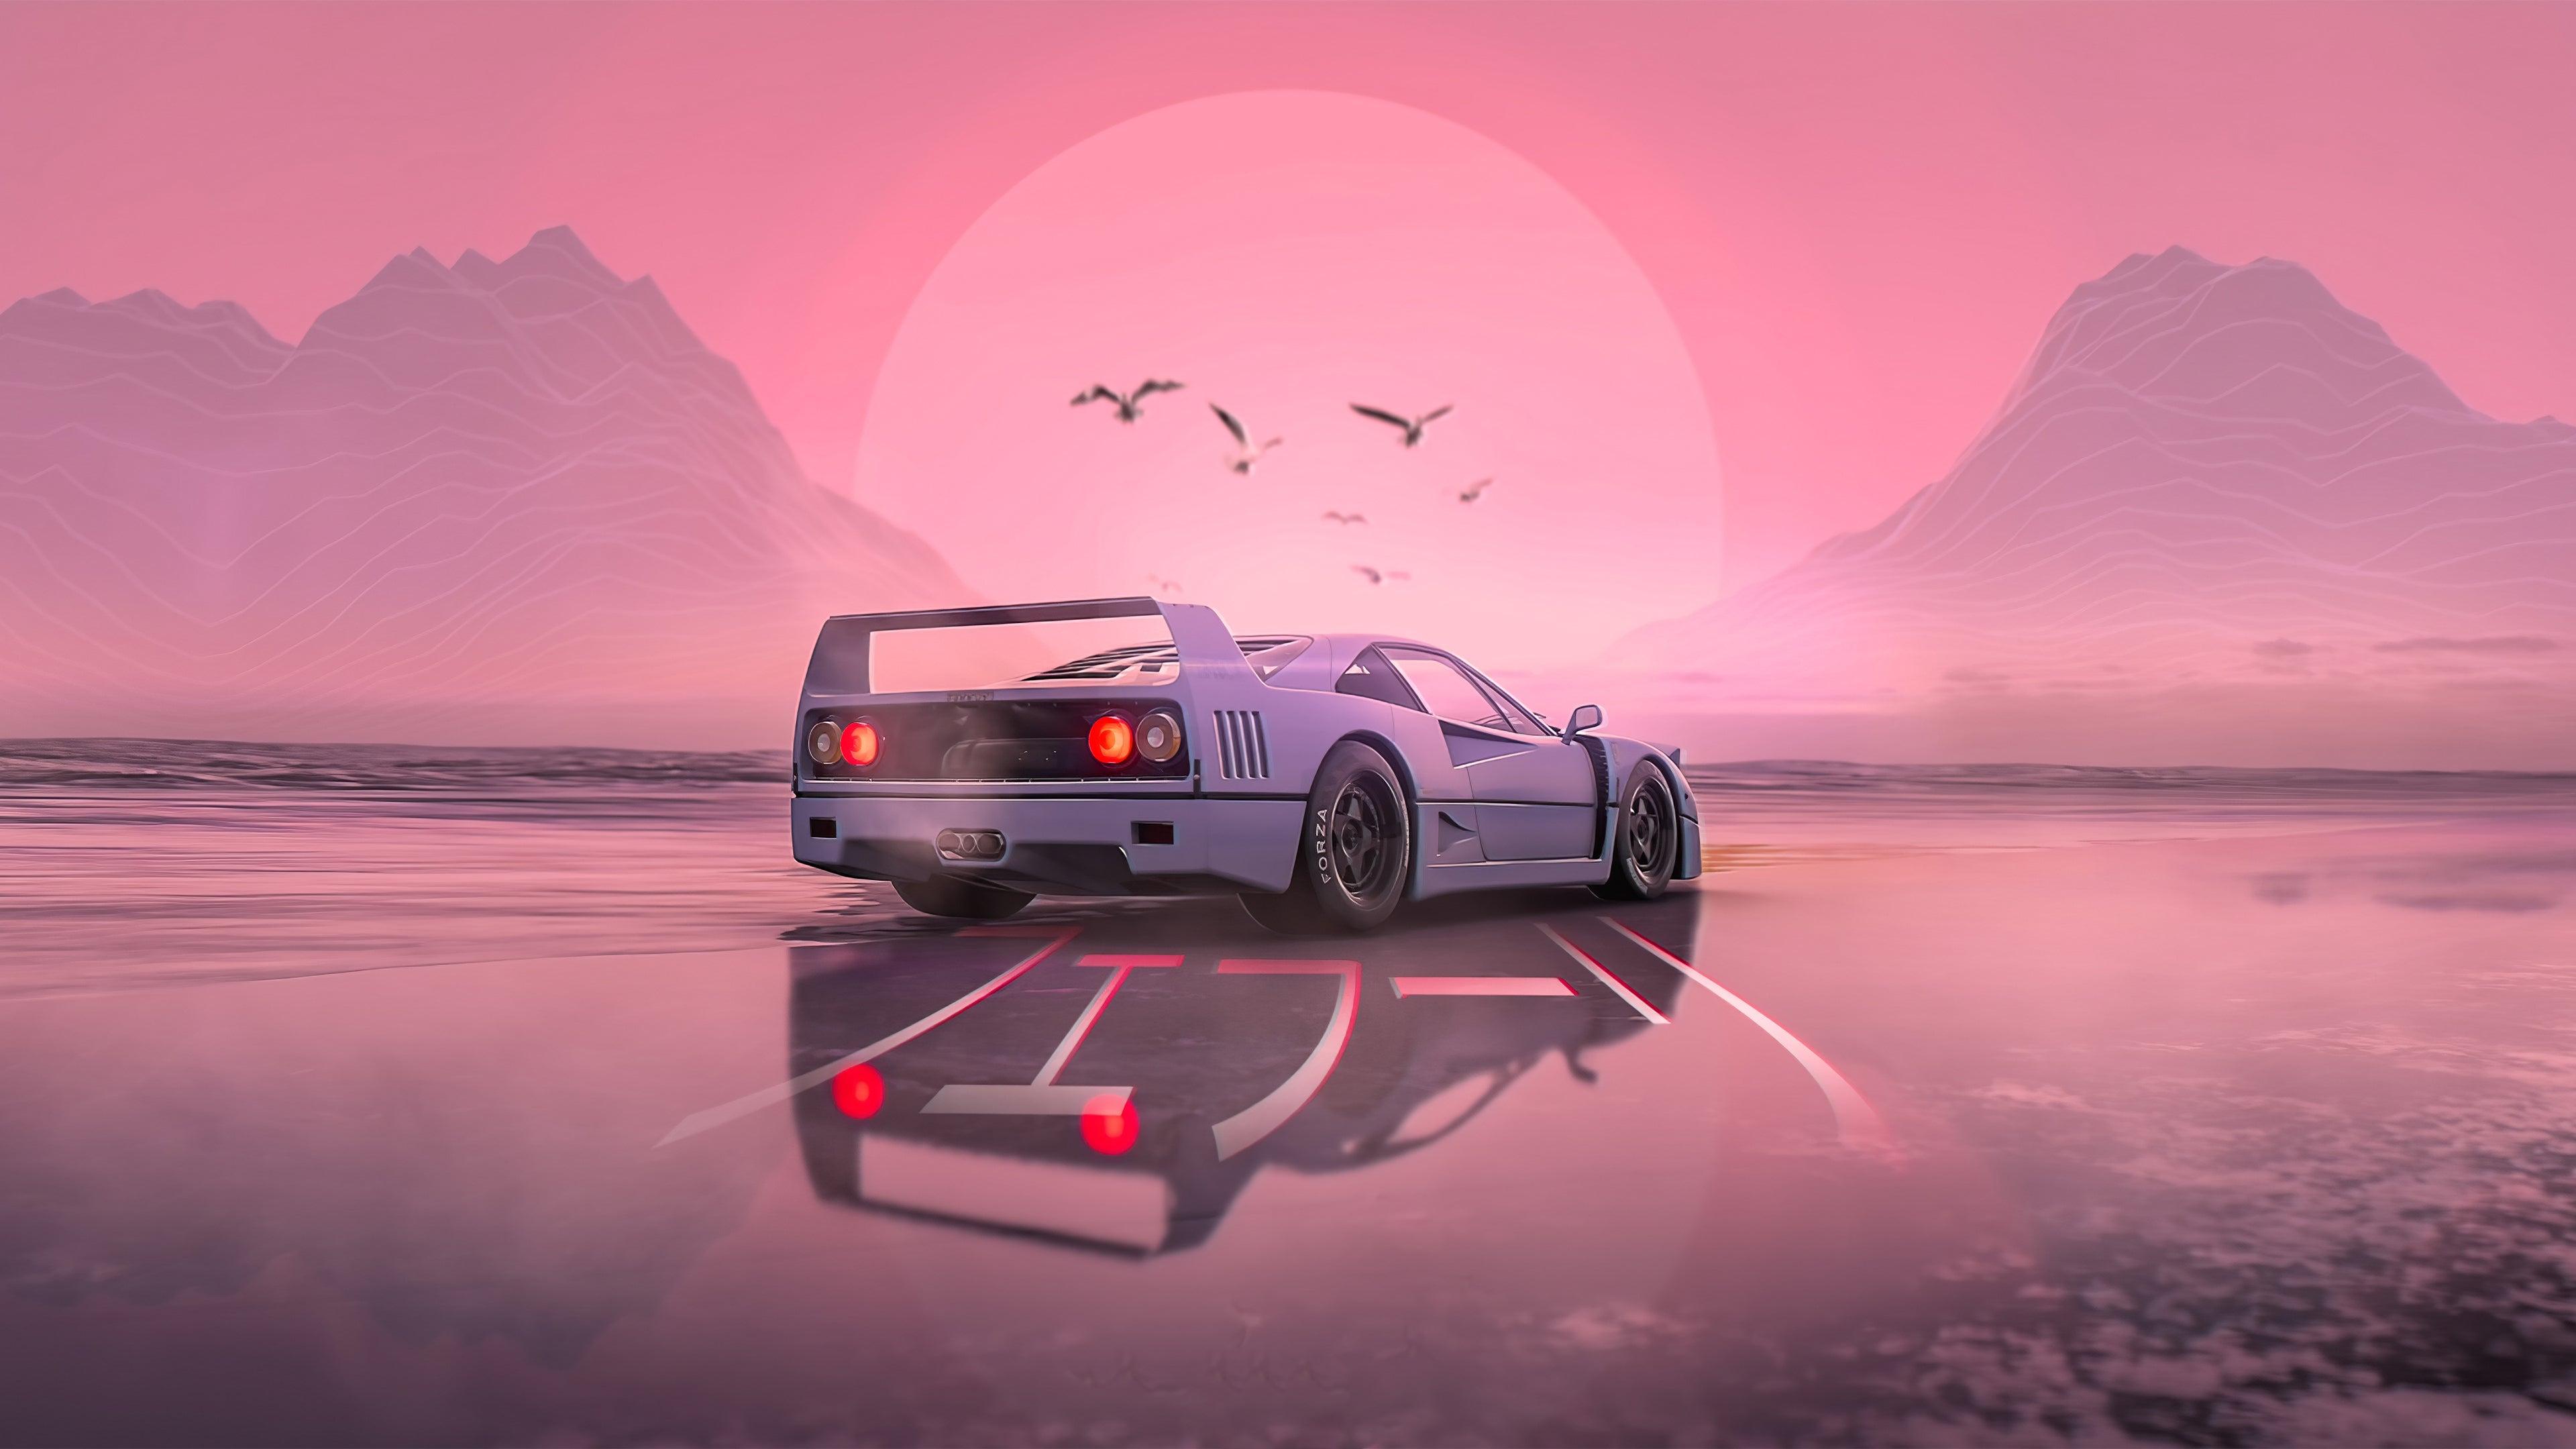 Retrowave 4K wallpaper for your desktop or mobile screen free and easy to download